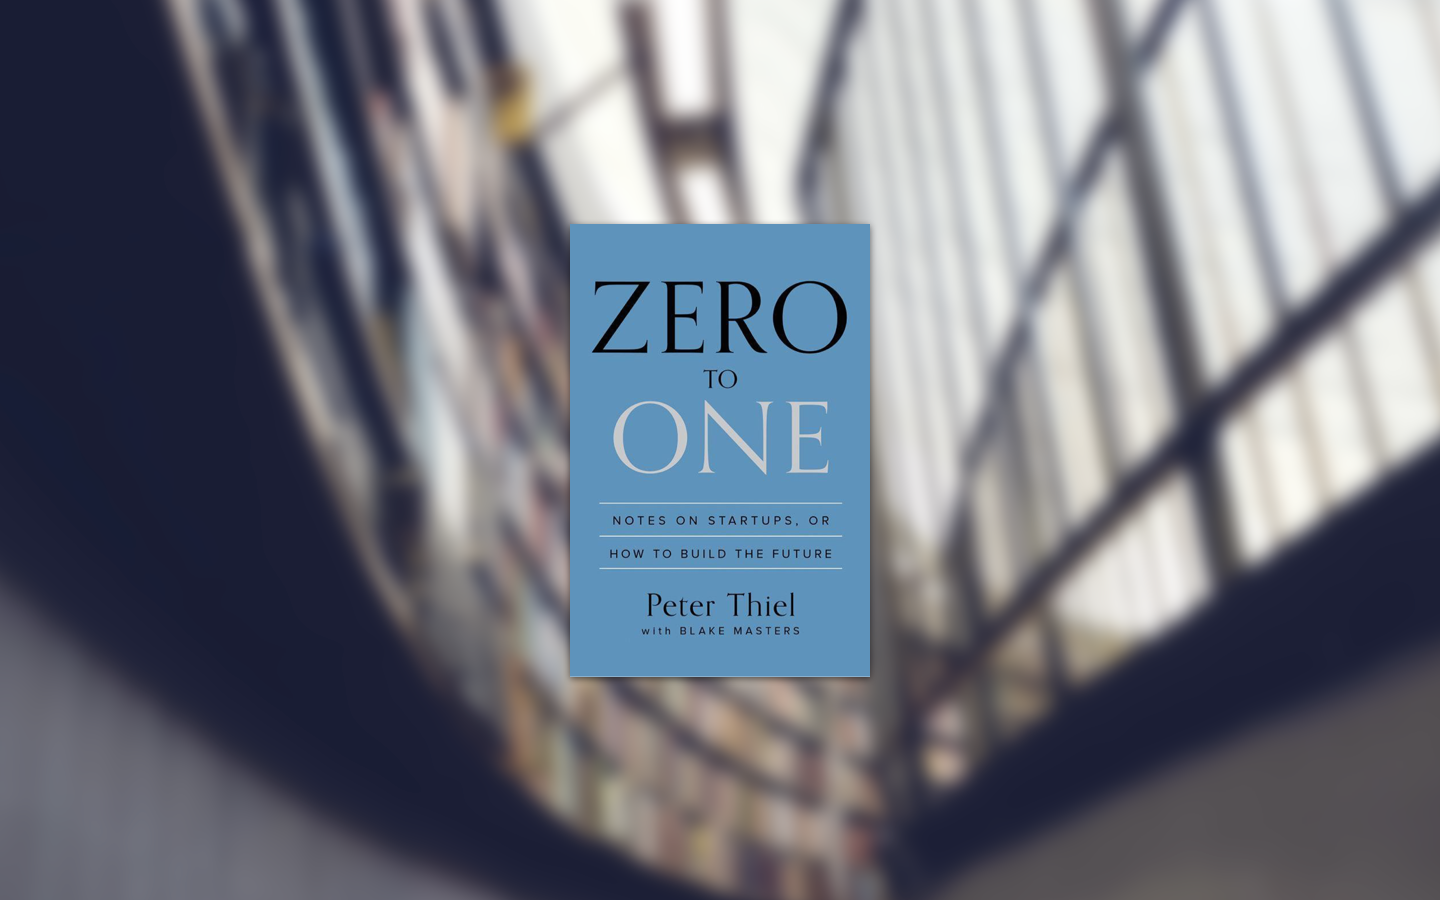 Zero to One download the new for windows